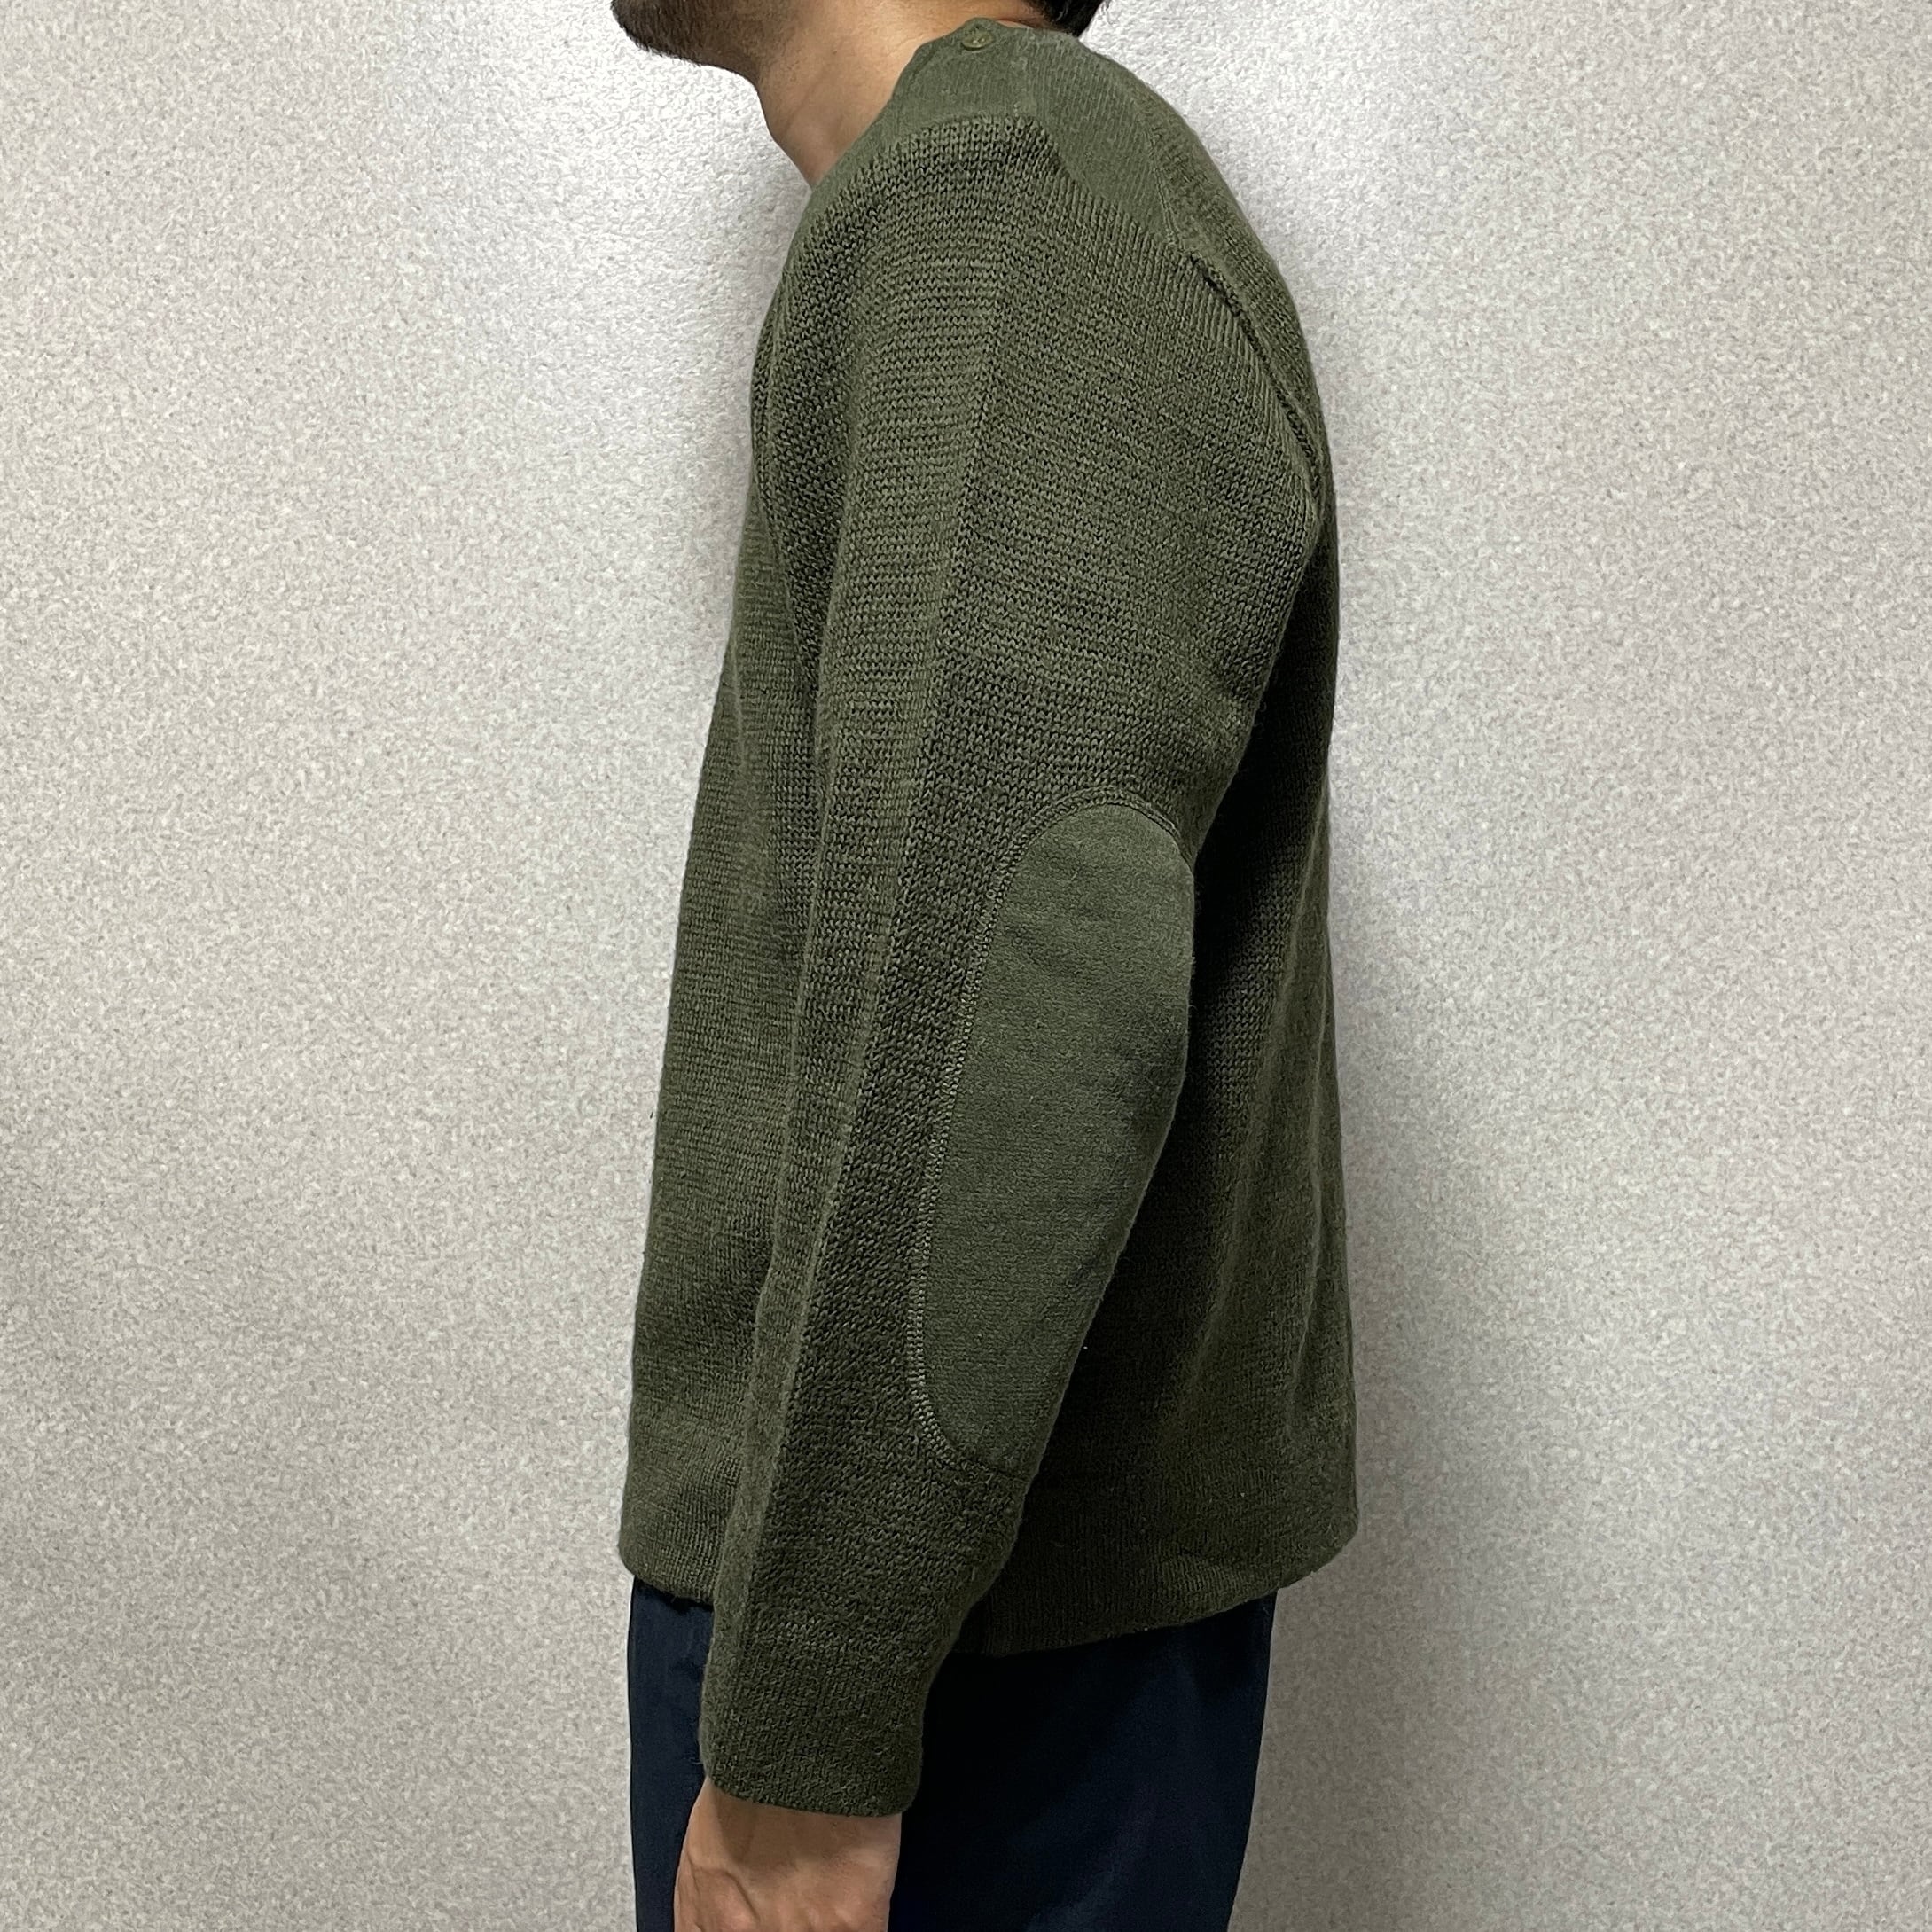 french army】command sweater フランス軍 コマンドセーター | ALLNATIONS